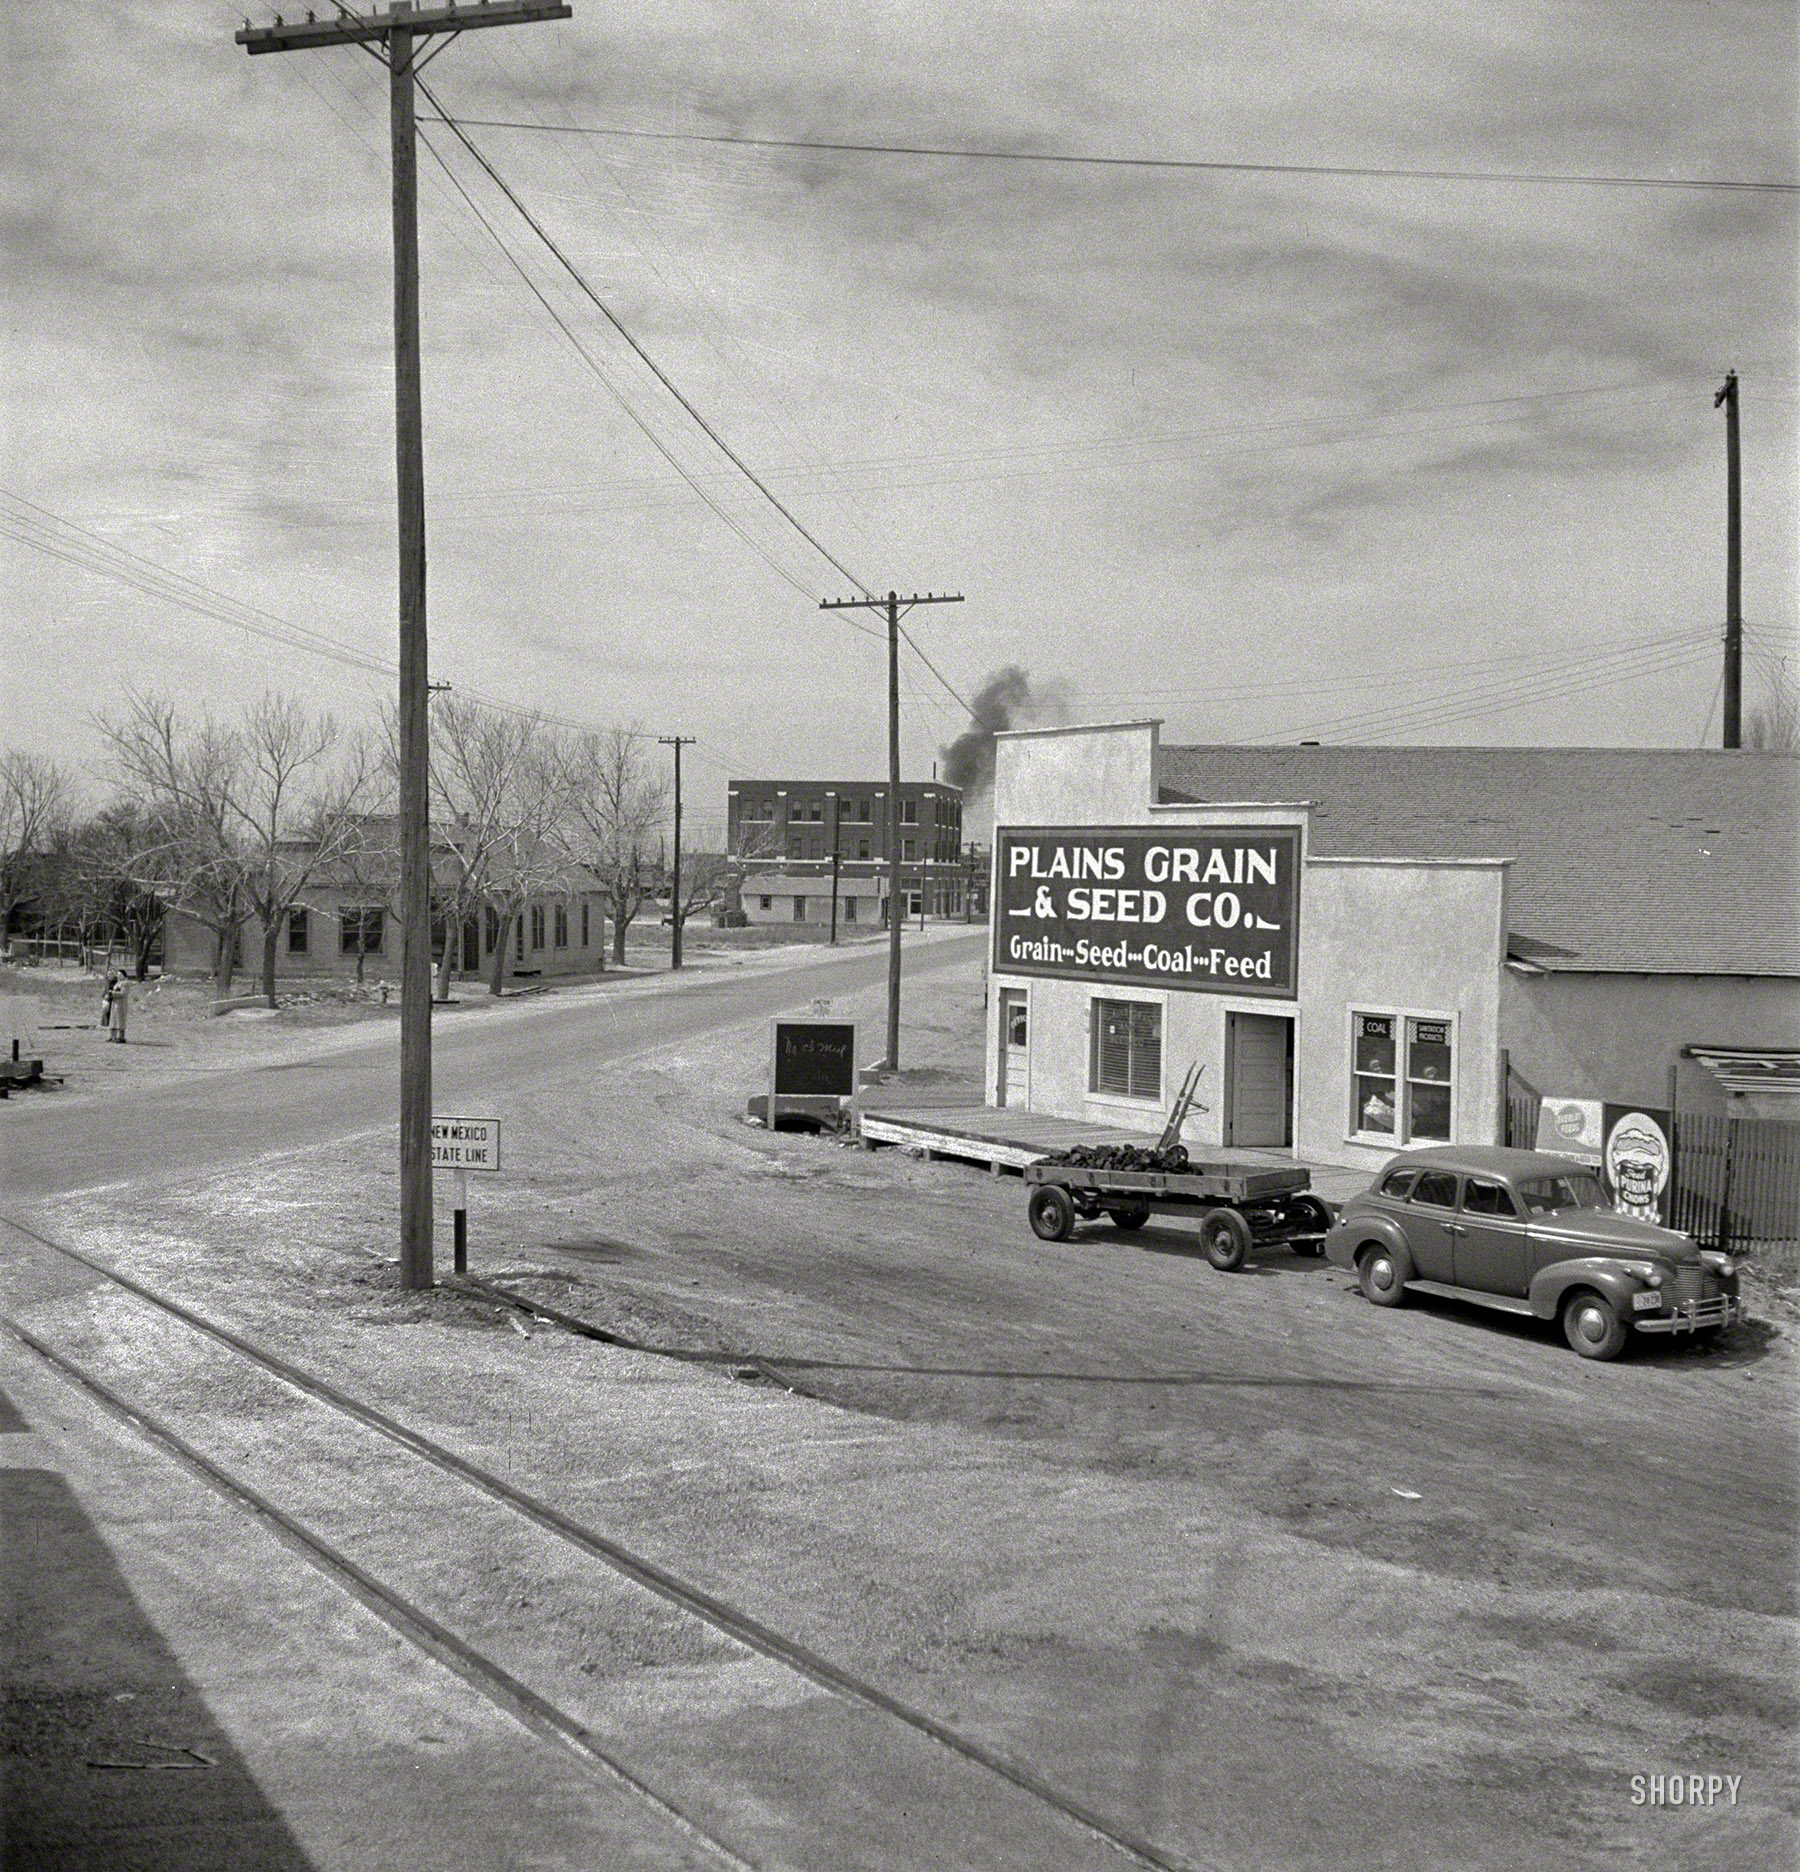 March 1943. "Farwell, Texas, at the New Mexico state line. Going through town on the Atchison, Topeka & Santa Fe Railroad between Amarillo, Texas, and Clovis, New Mexico." Photo by Jack Delano, Office of War Information. View full size.